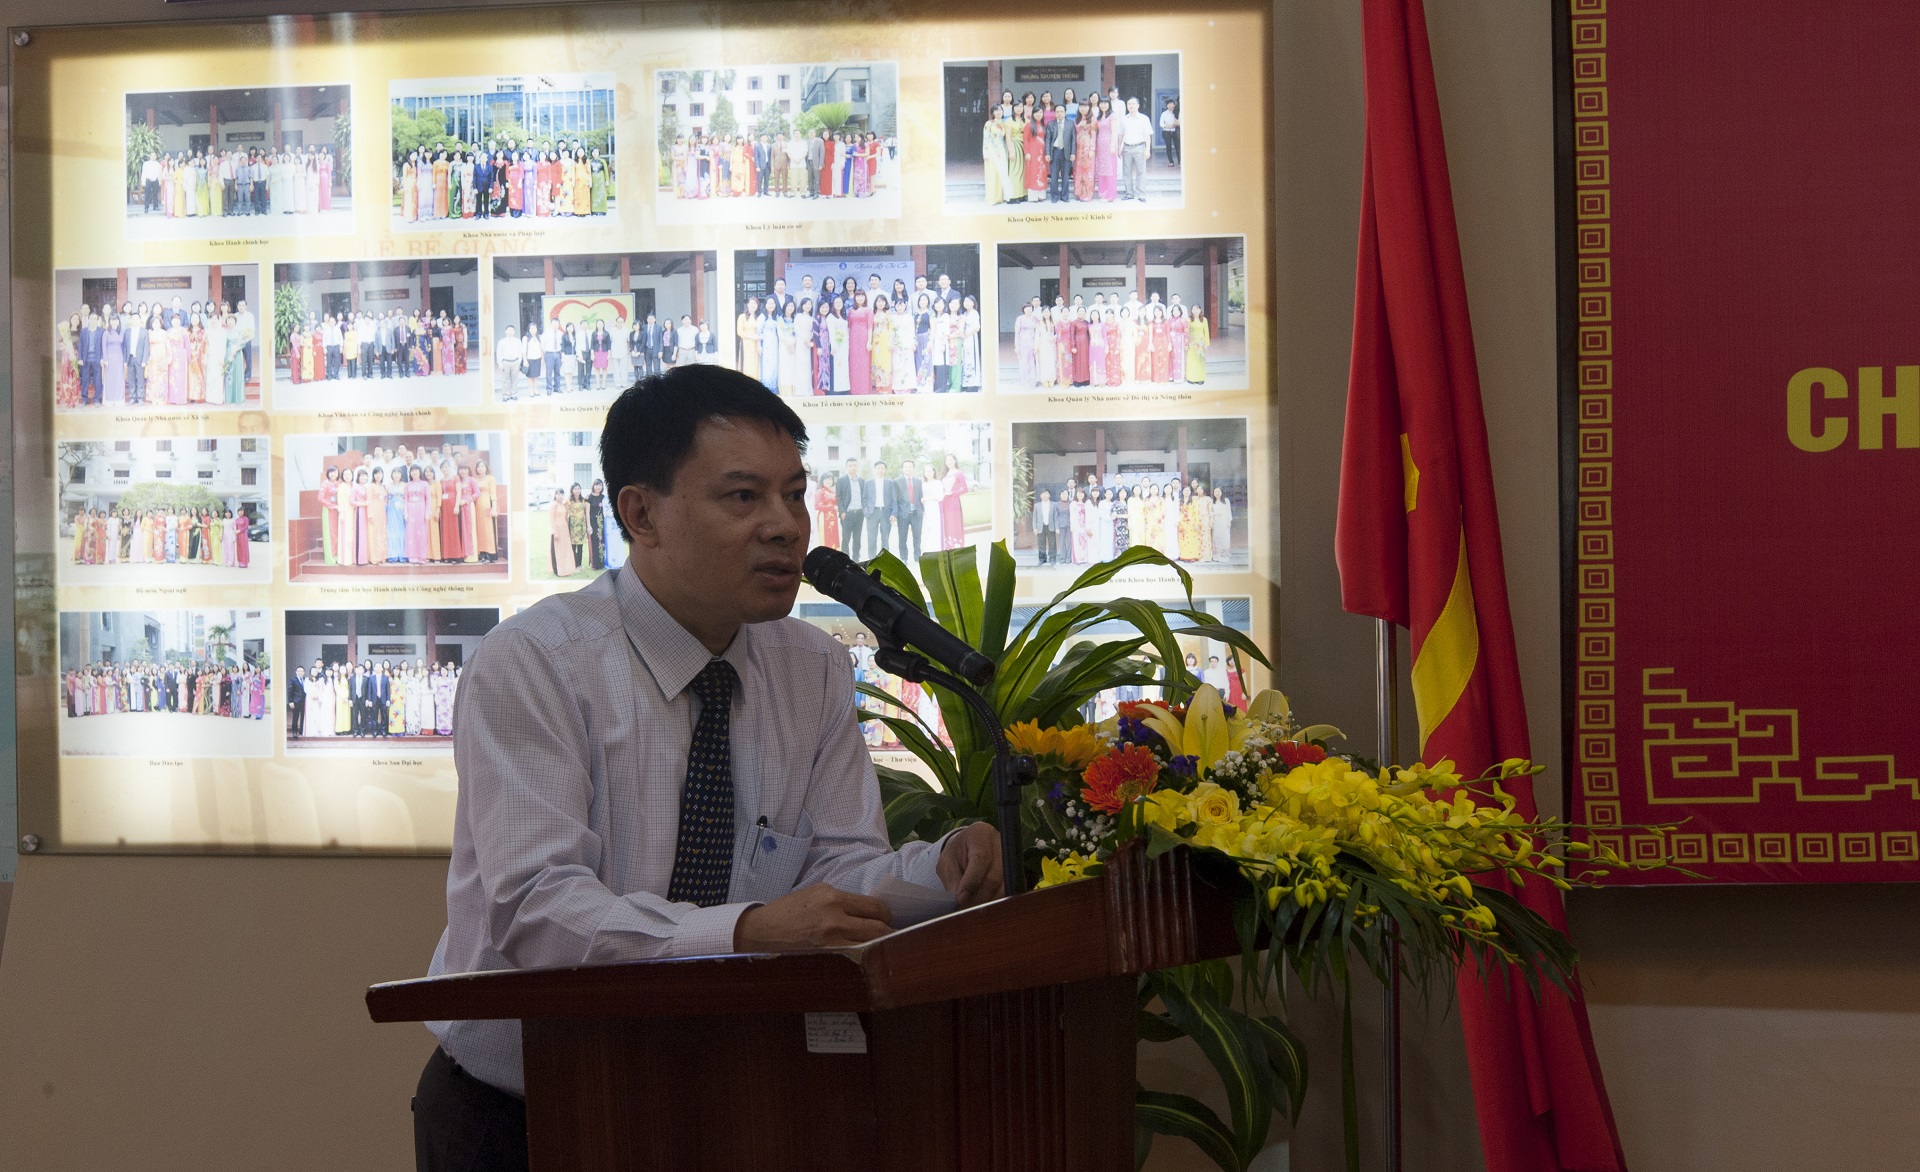 Mr. Tong Dang Hung, Vice Dean of  Public Servant Training faculty delivers a speech in the ceremony